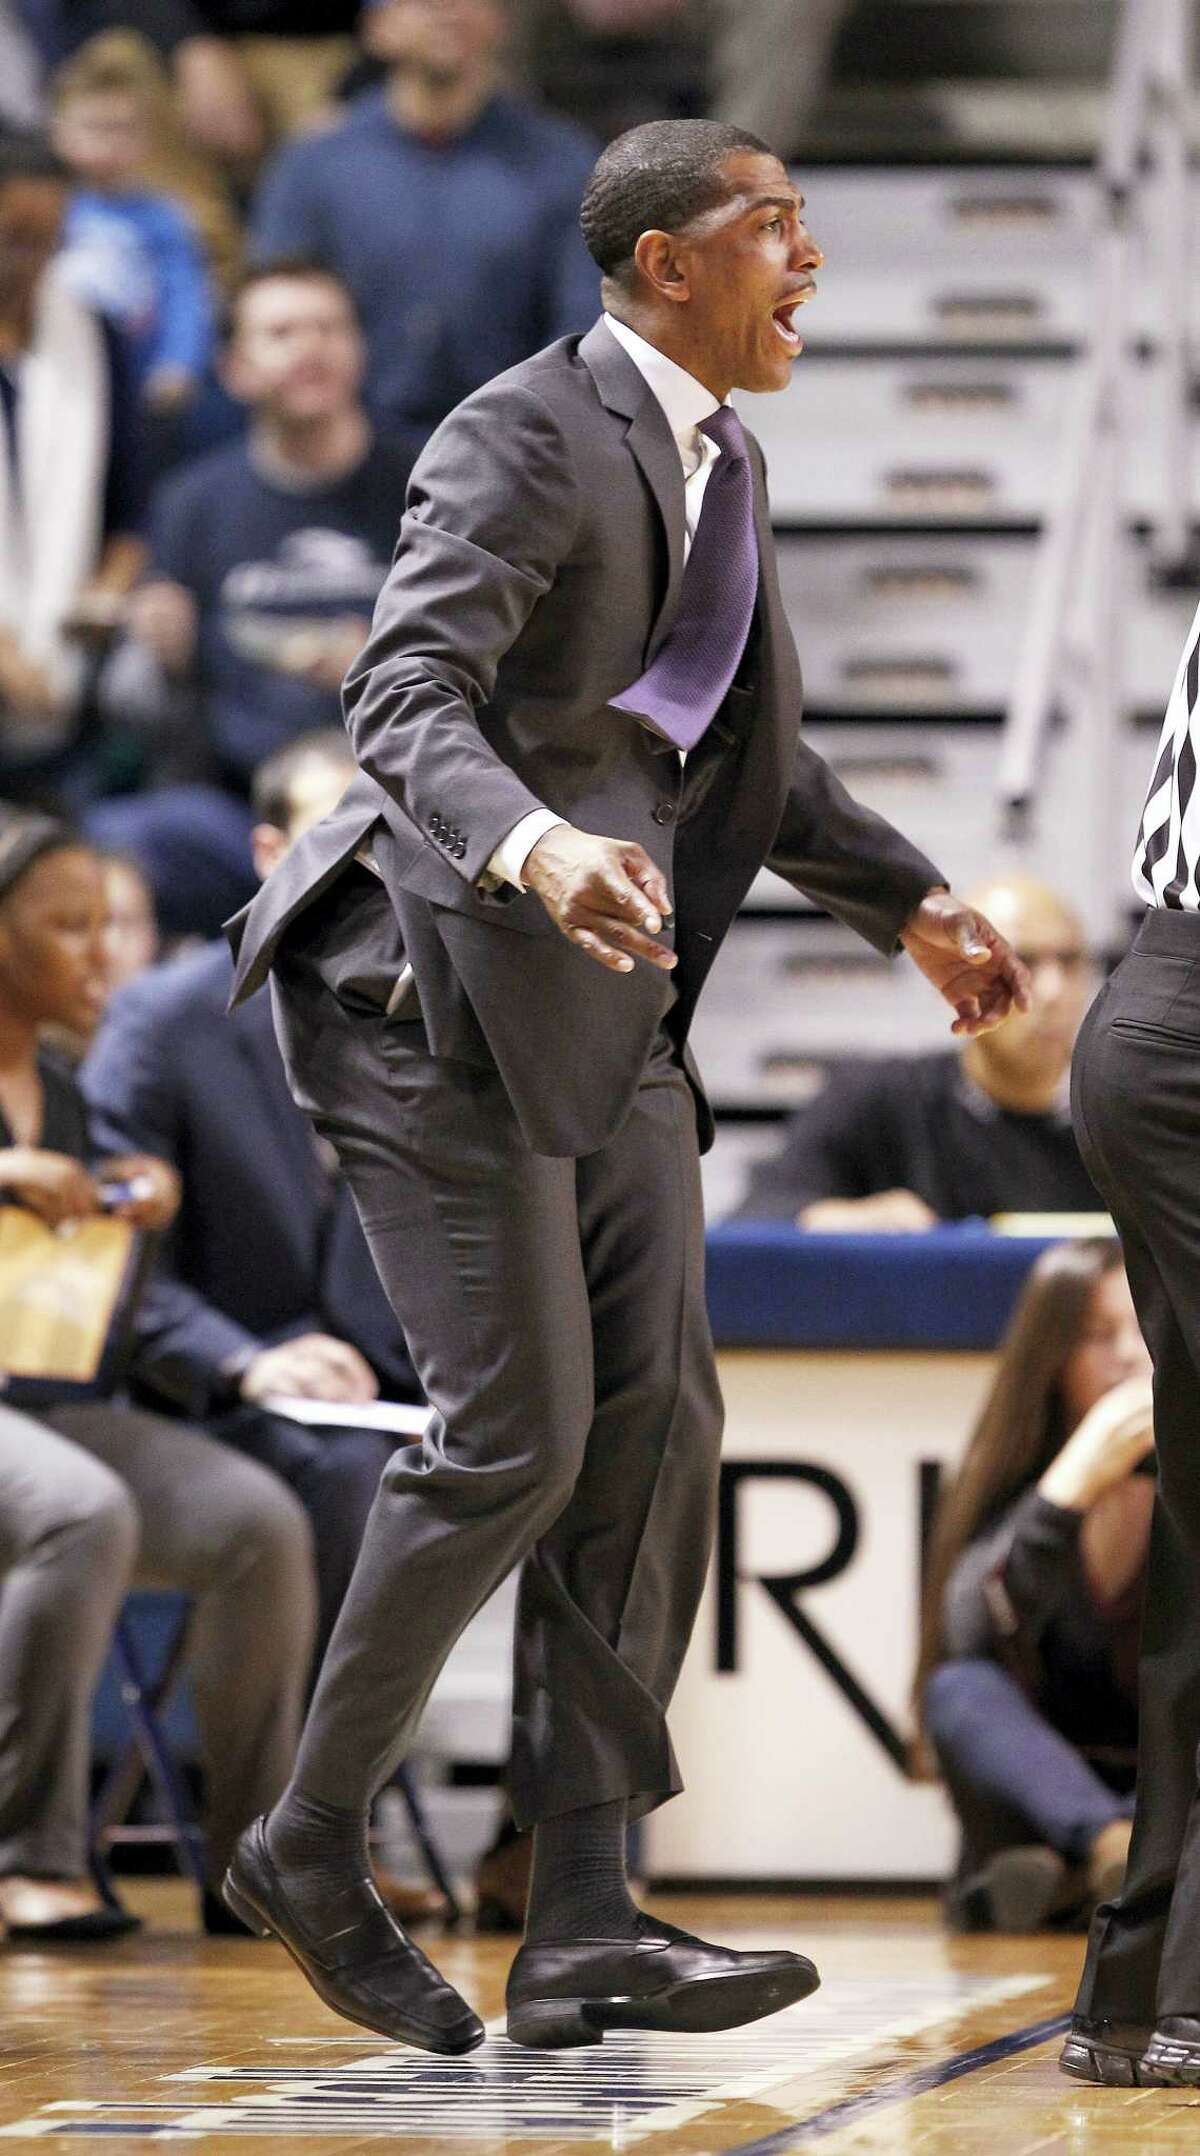 Connecticut head coach Kevin Ollie shouts instructions to his team during the first half of an NCAA college basketball game against Tulsa in Tulsa, Okla., Thursday, Jan. 14, 2016. (AP Photo/Dave Crenshaw)